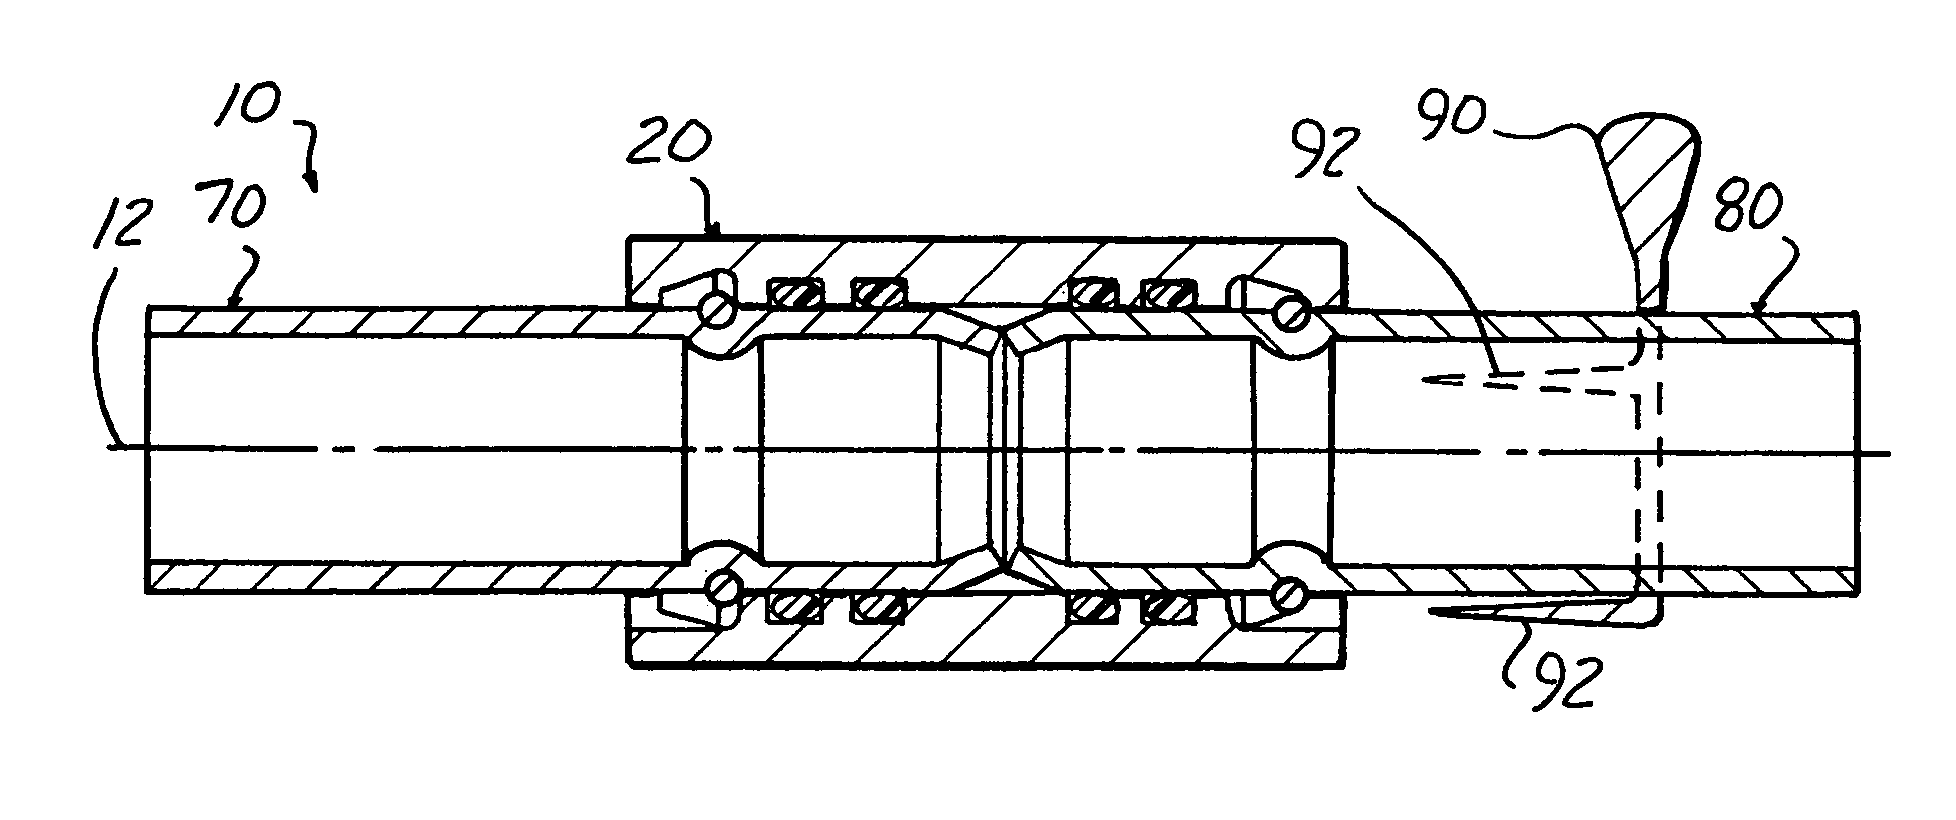 Union coupler assembly for coolant lines